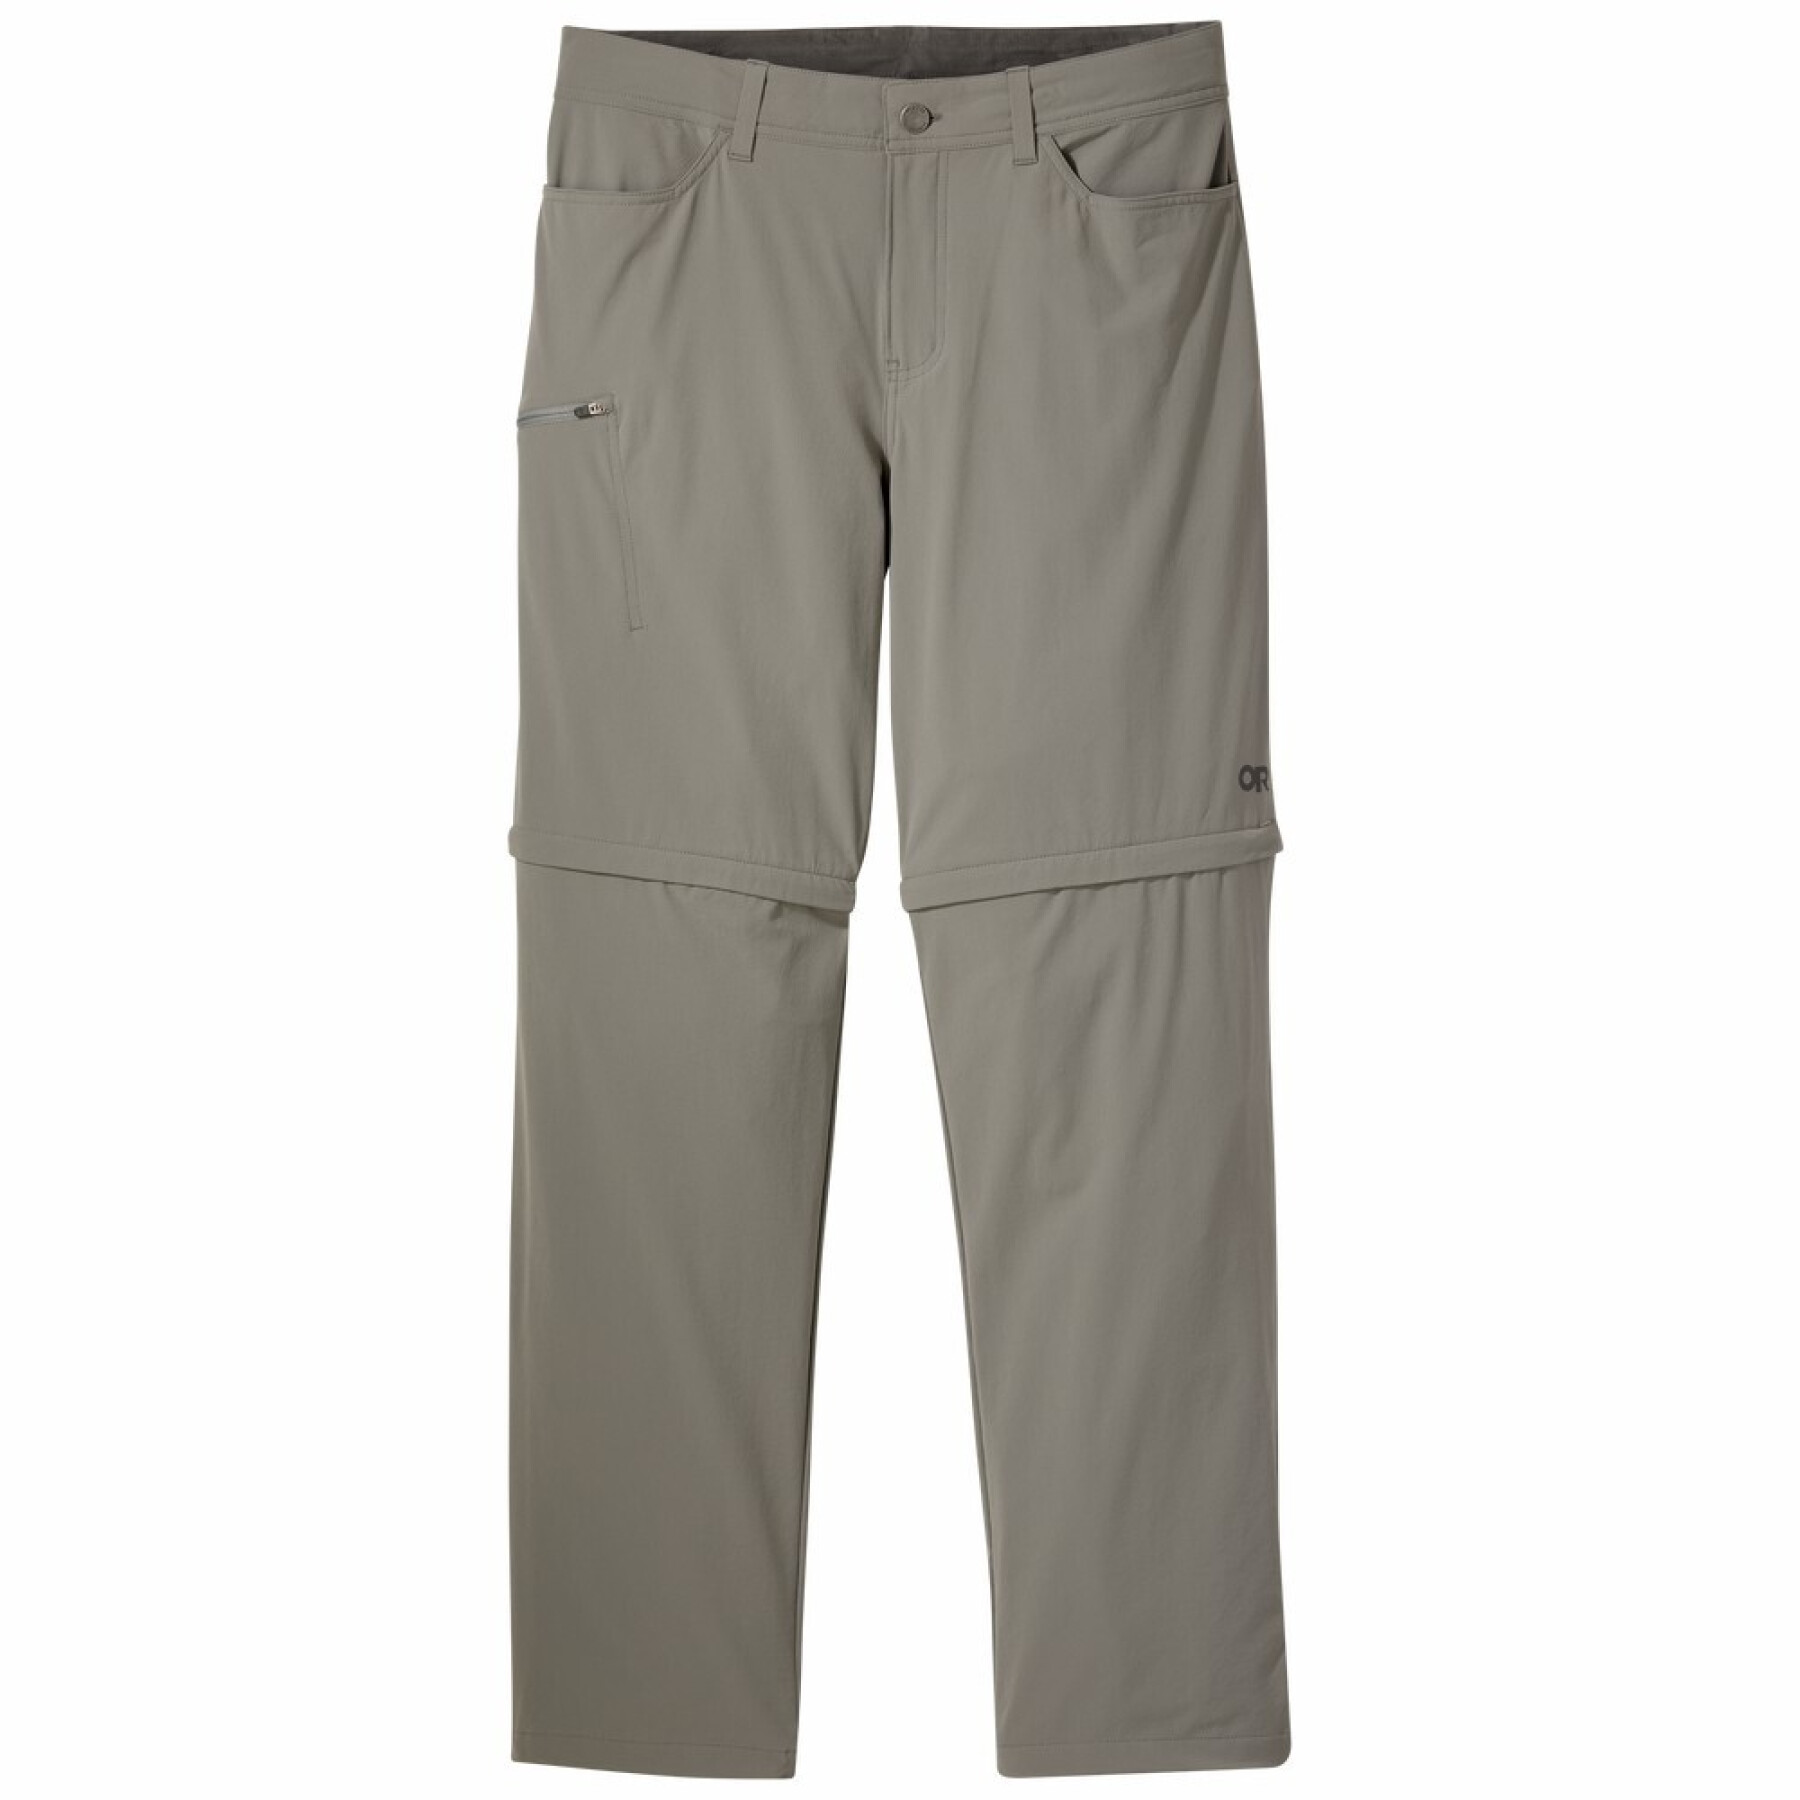 Convertible pants Outdoor Research Ferrosi 30"